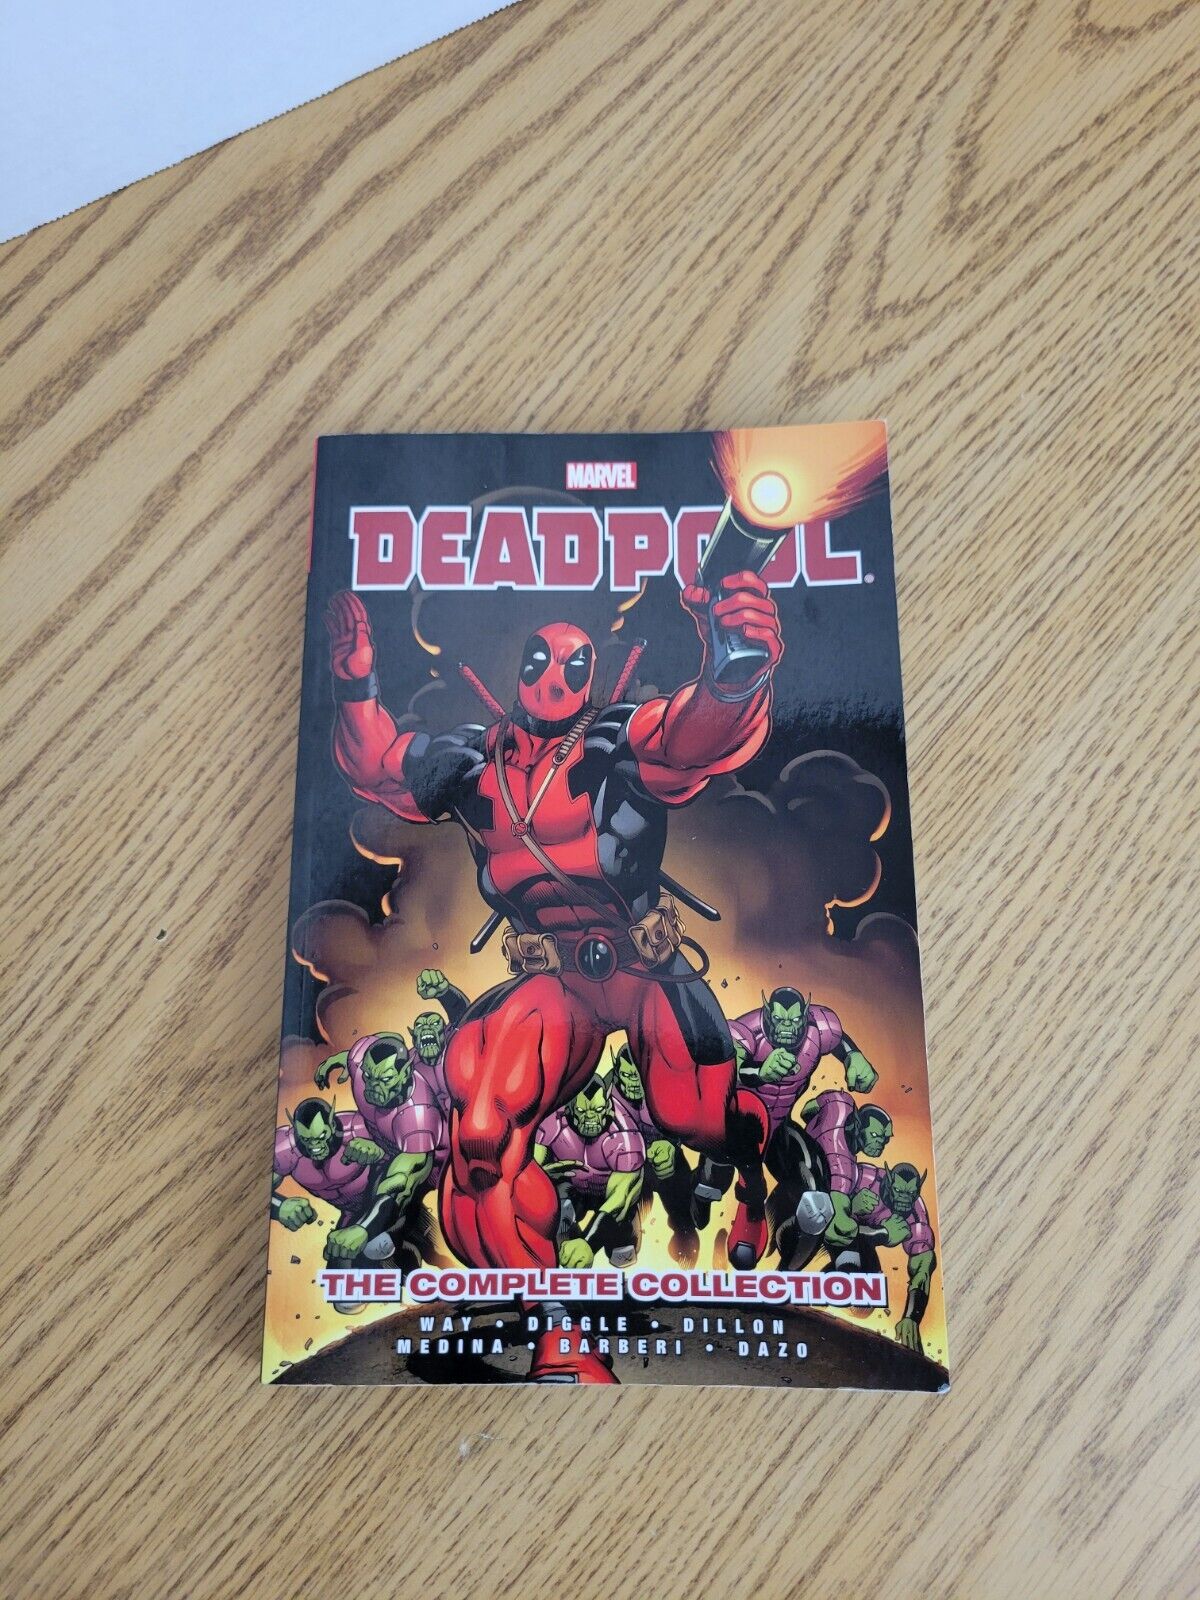  Deadpool The Complete Collection Vol 1 (Marvel 2013) Daniel Way 472 Pages